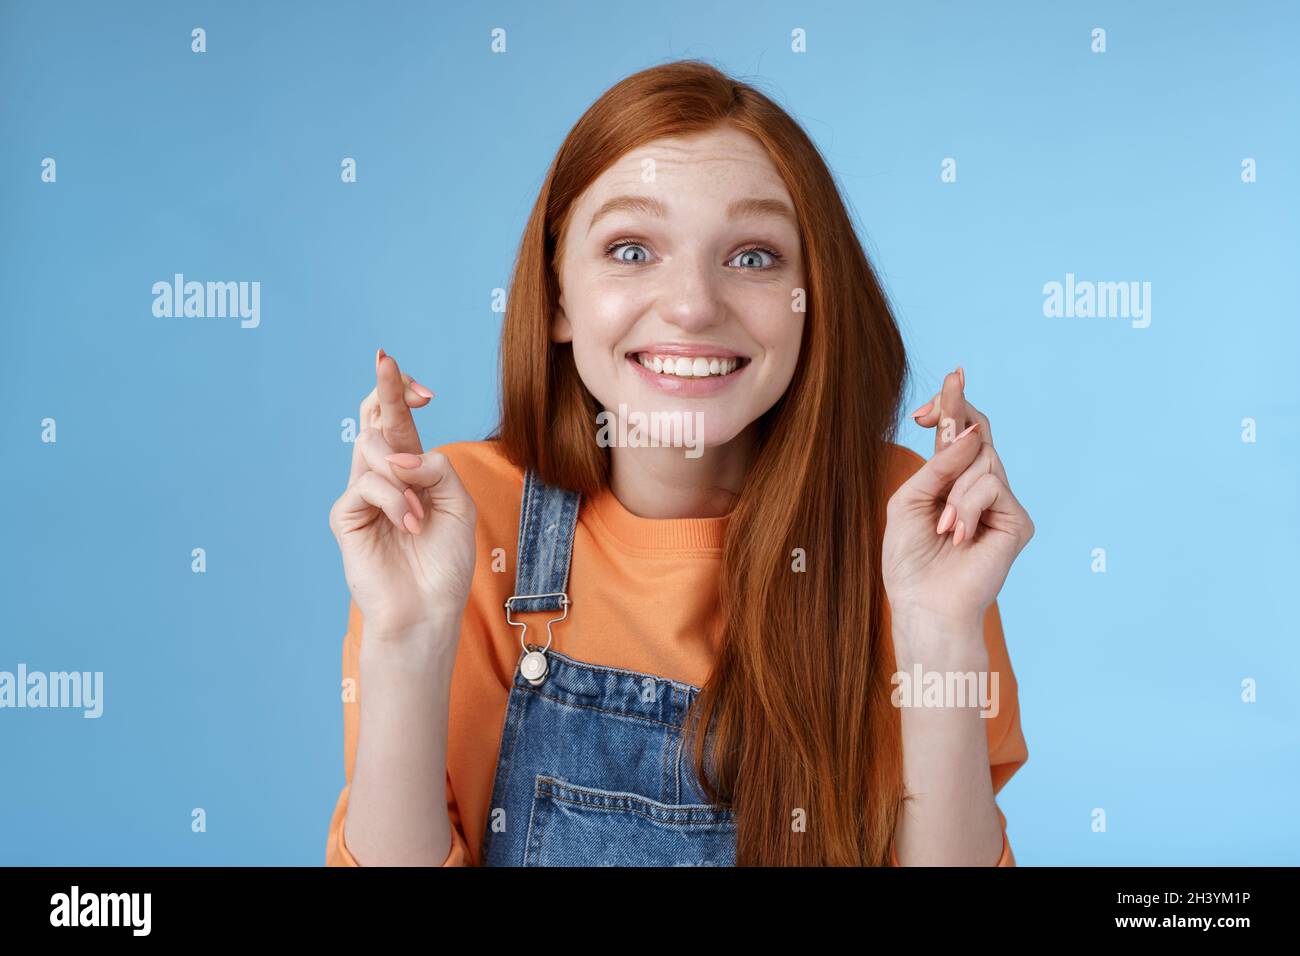 Excited emotional happy cheerful redhead girl smiling optimistic stare surprised thrilled cross fingers good luck believe dream Stock Photo